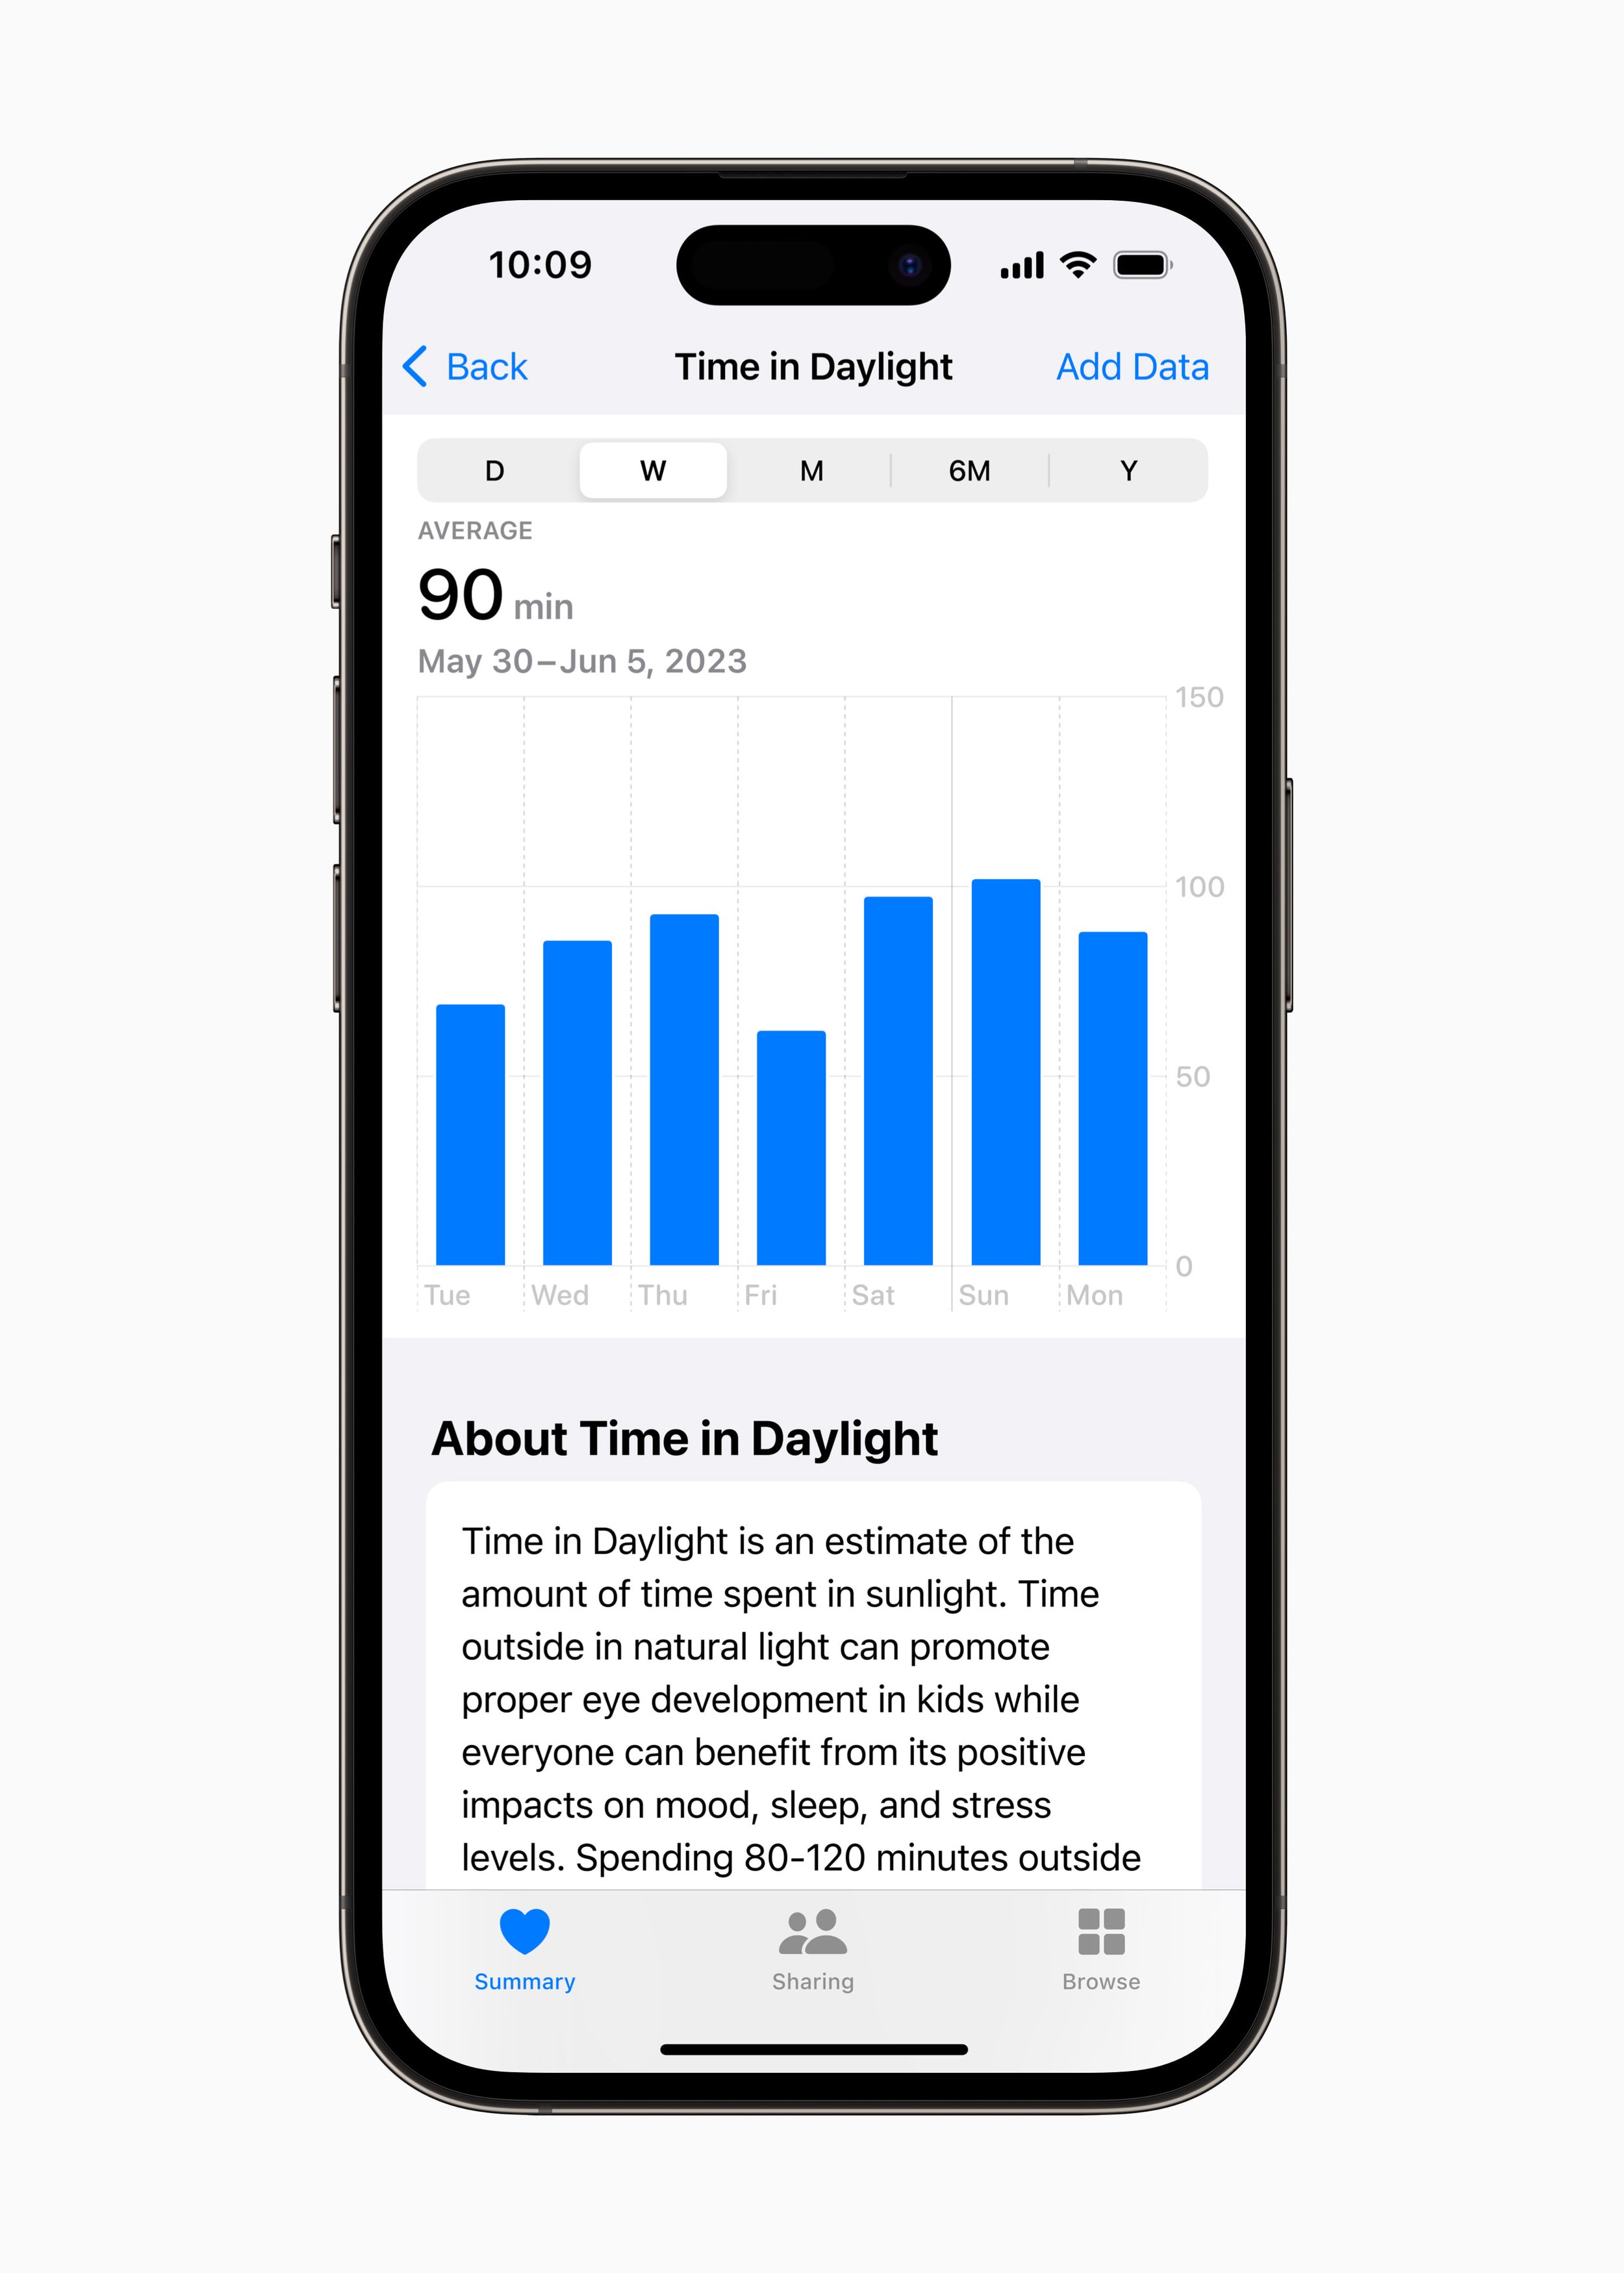 Apple-WWDC23-health-insights-Vision-Health-Time-In-Daylight-230605.jpg